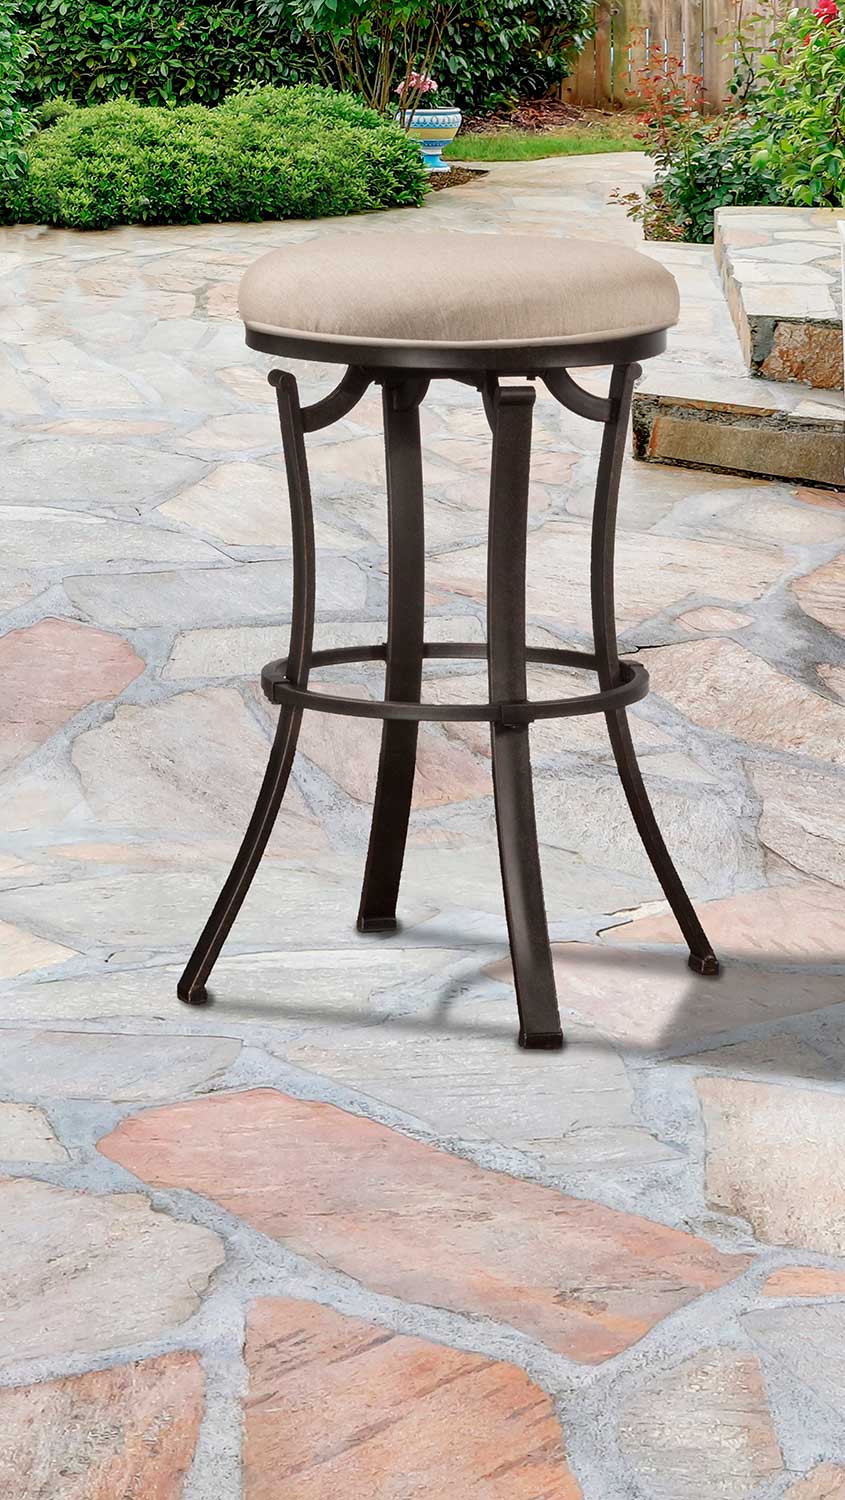 Hillsdale Bryce Indoor/Outdoor Backless Swivel Counter Stool - Midnight Mocha